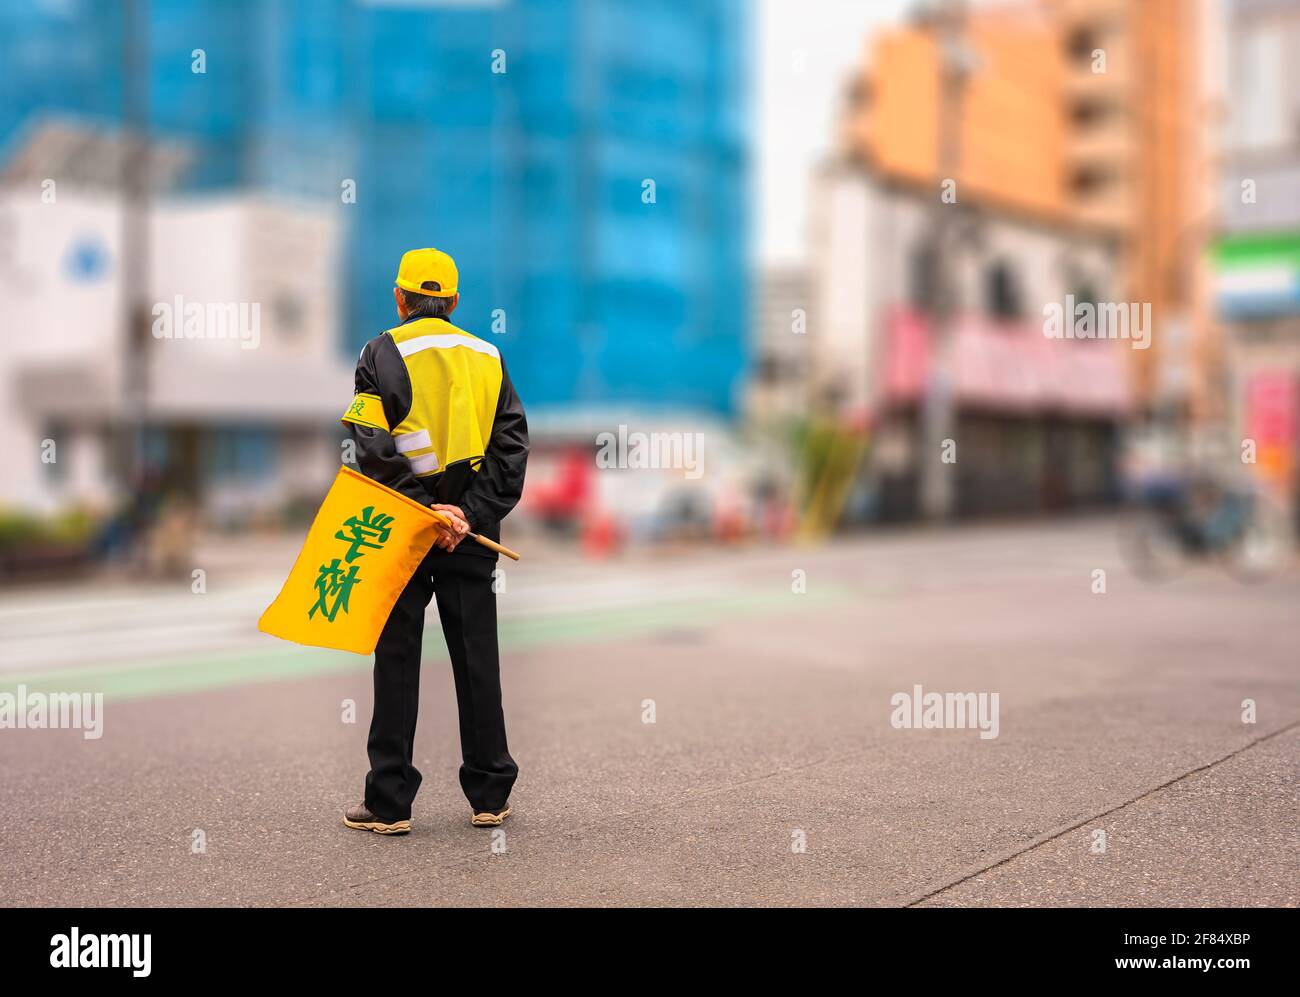 Back view of a Japanese elderly man holding a printed 'school' road crossing flag and wearing yellow cap, safety vest, armband waiting children at ped Stock Photo